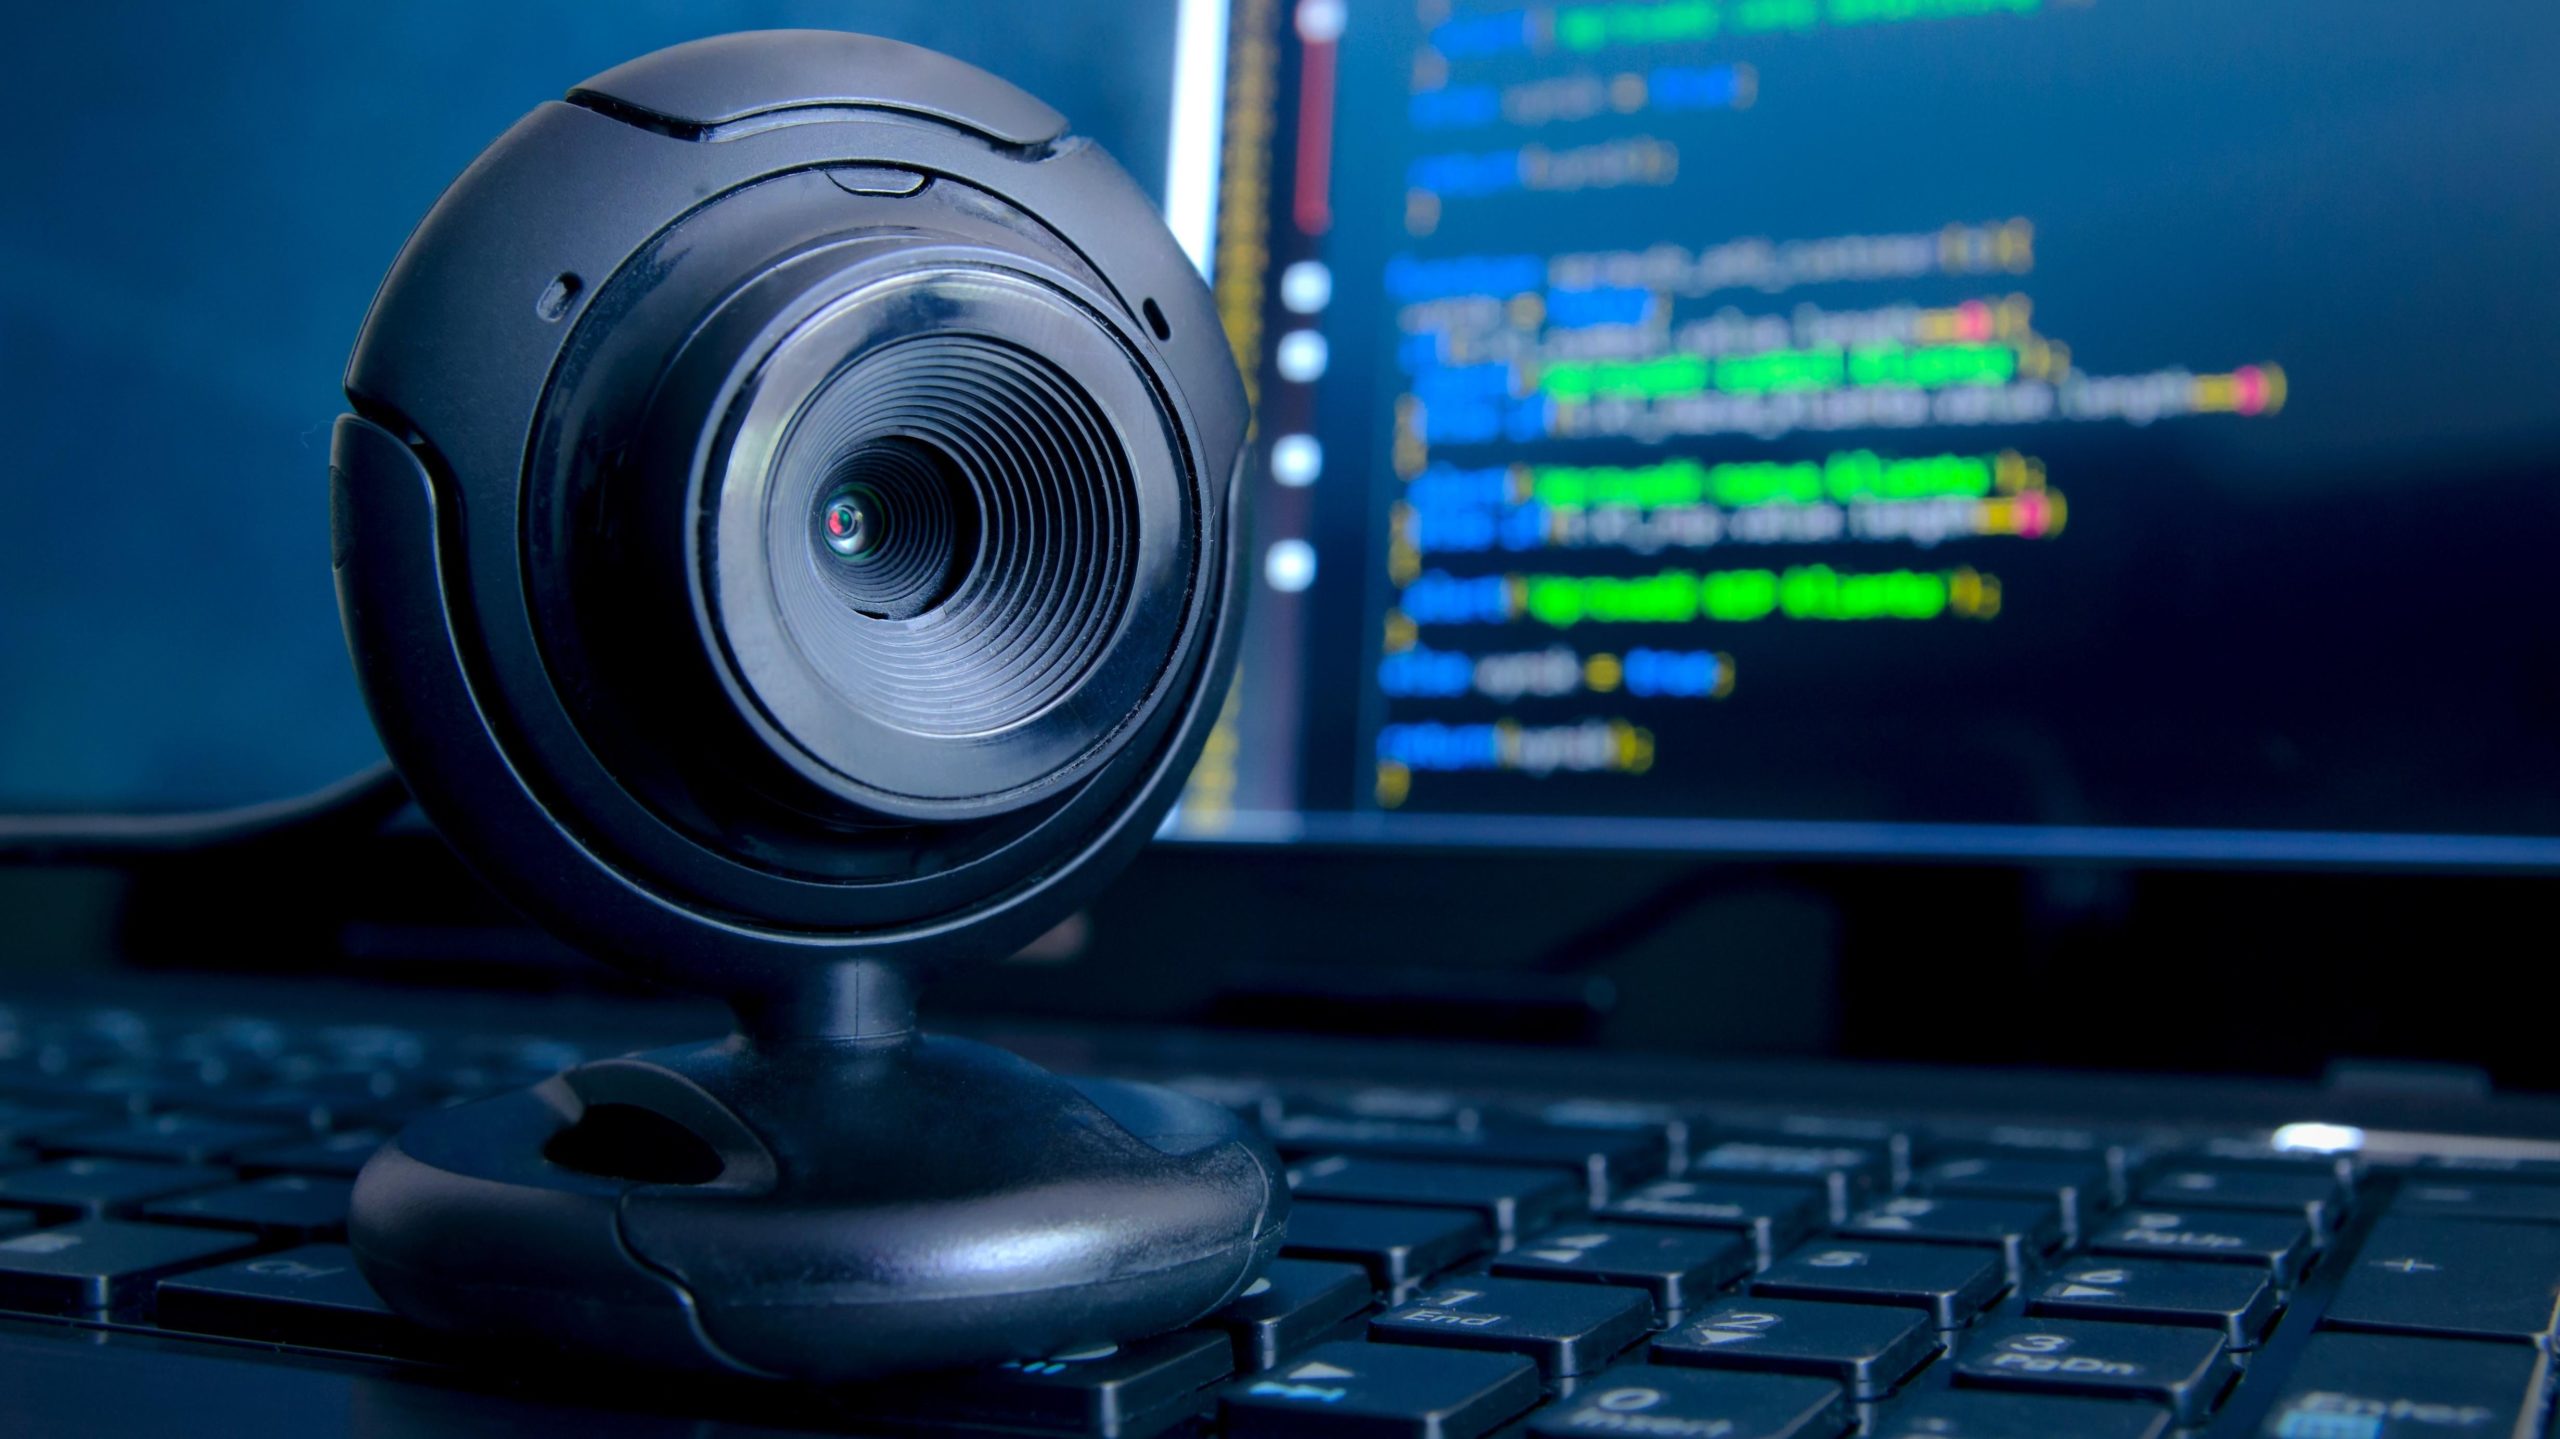 Can Someone Really Spy on Me Through My Webcam or Phone Camera?